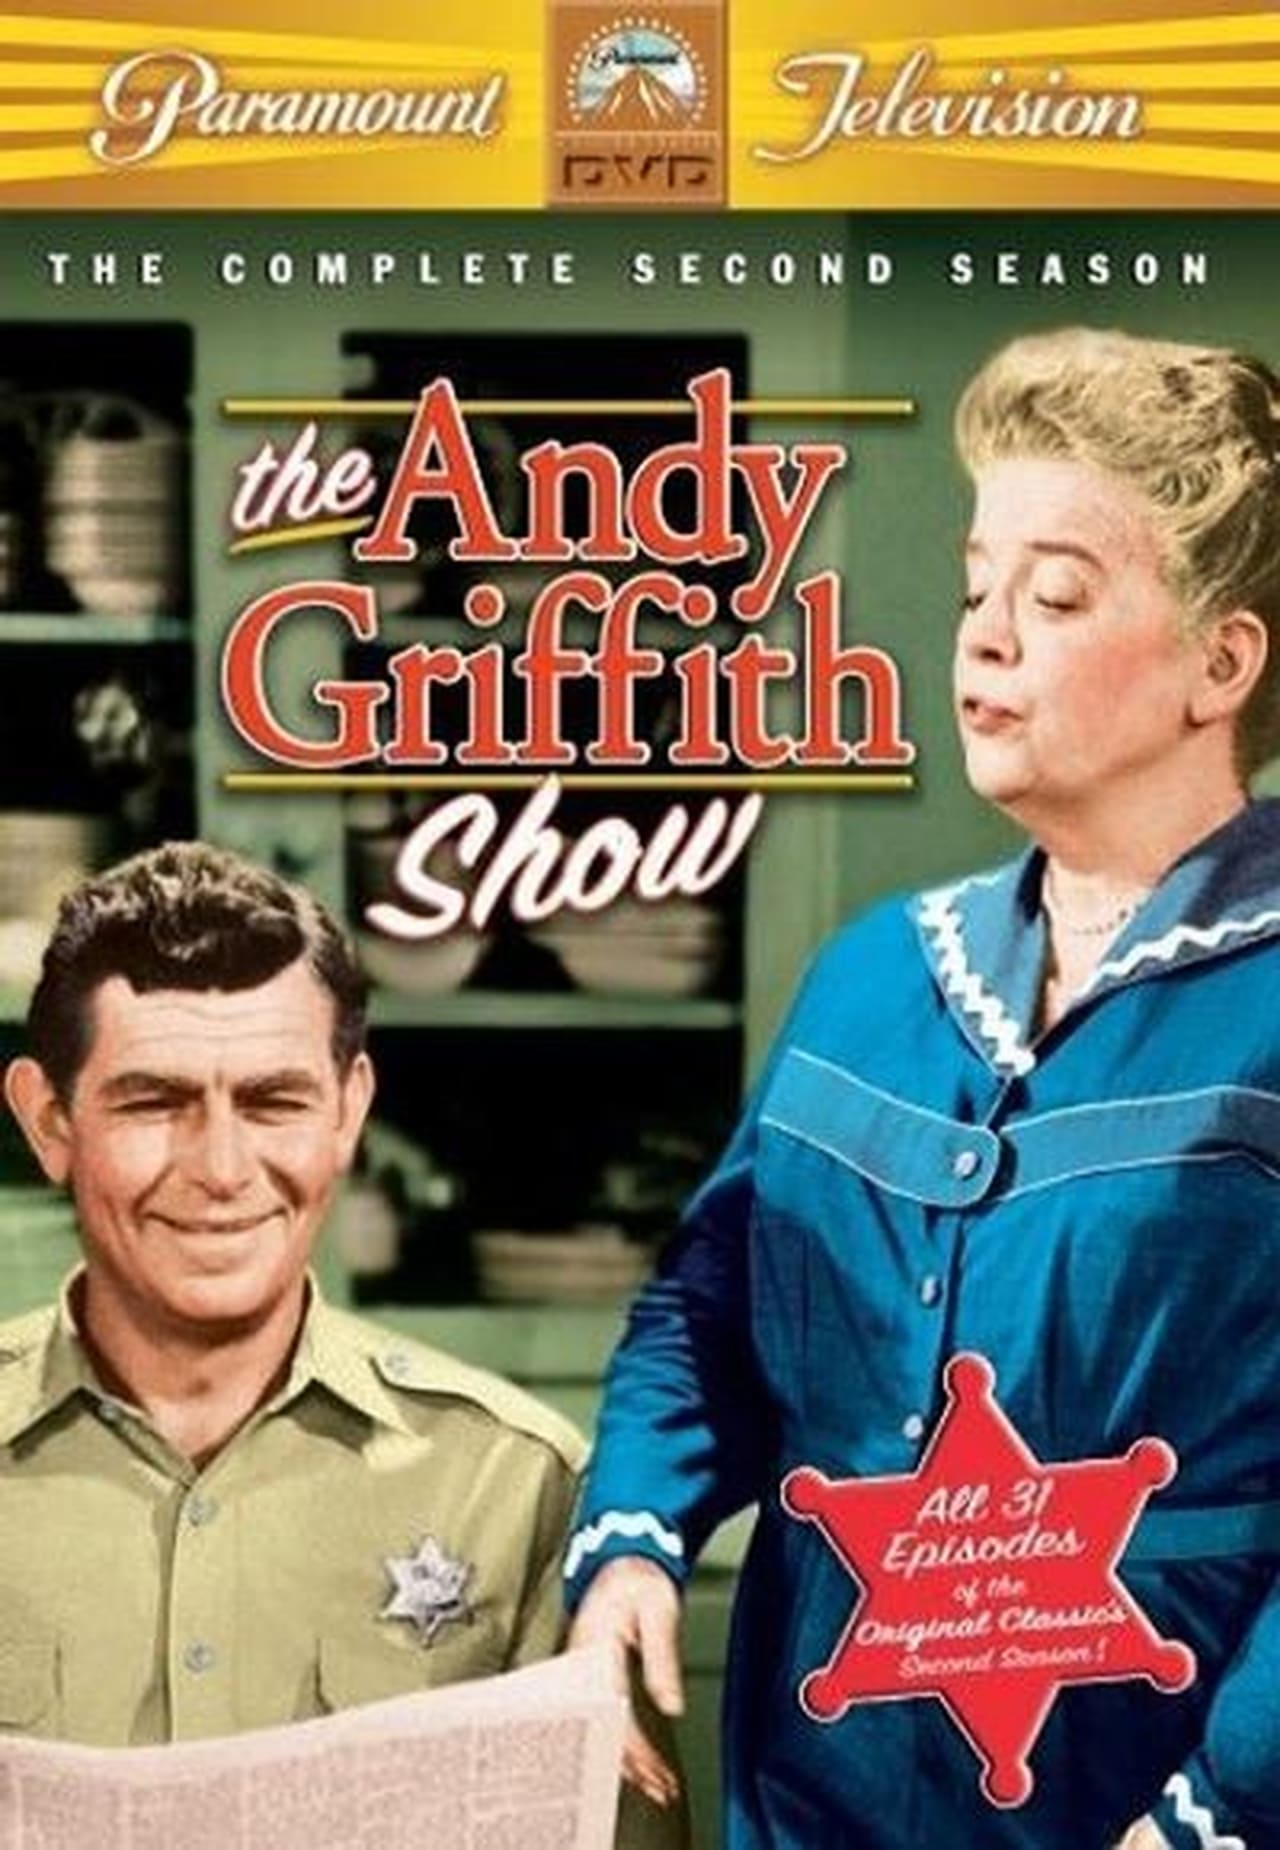 The Andy Griffith Show Season 2